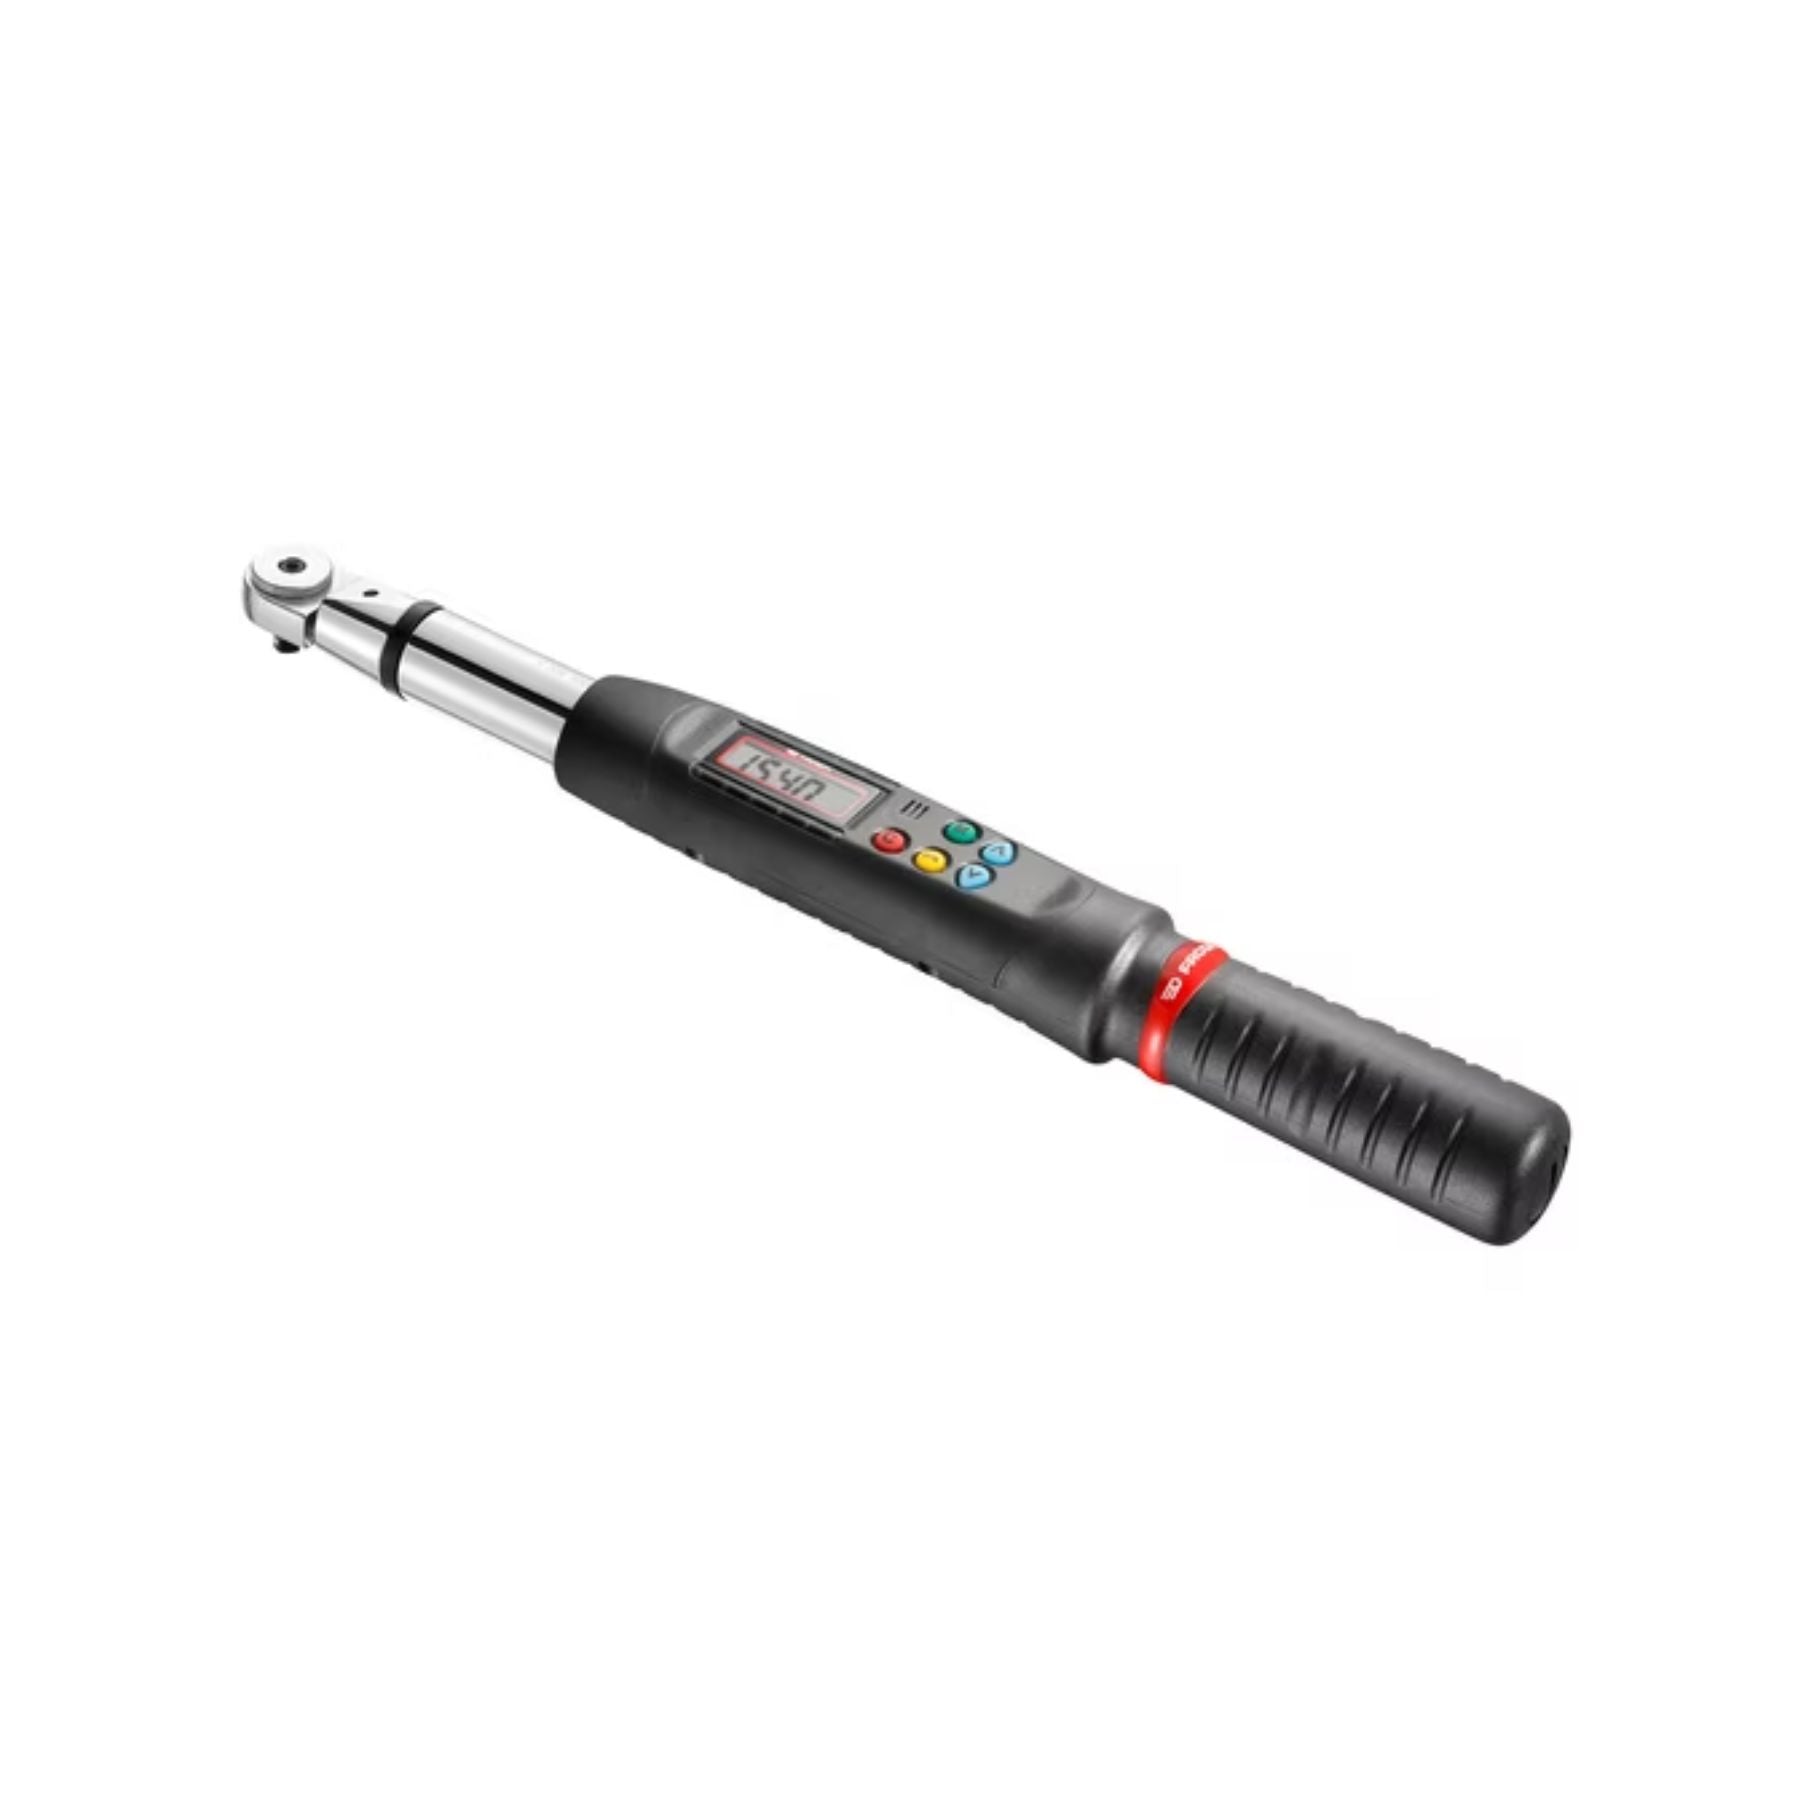 Facom E.306A30R Digital Electronic Torque Wrenches with Ratchet Capacity 1.5-30, Square 1/4